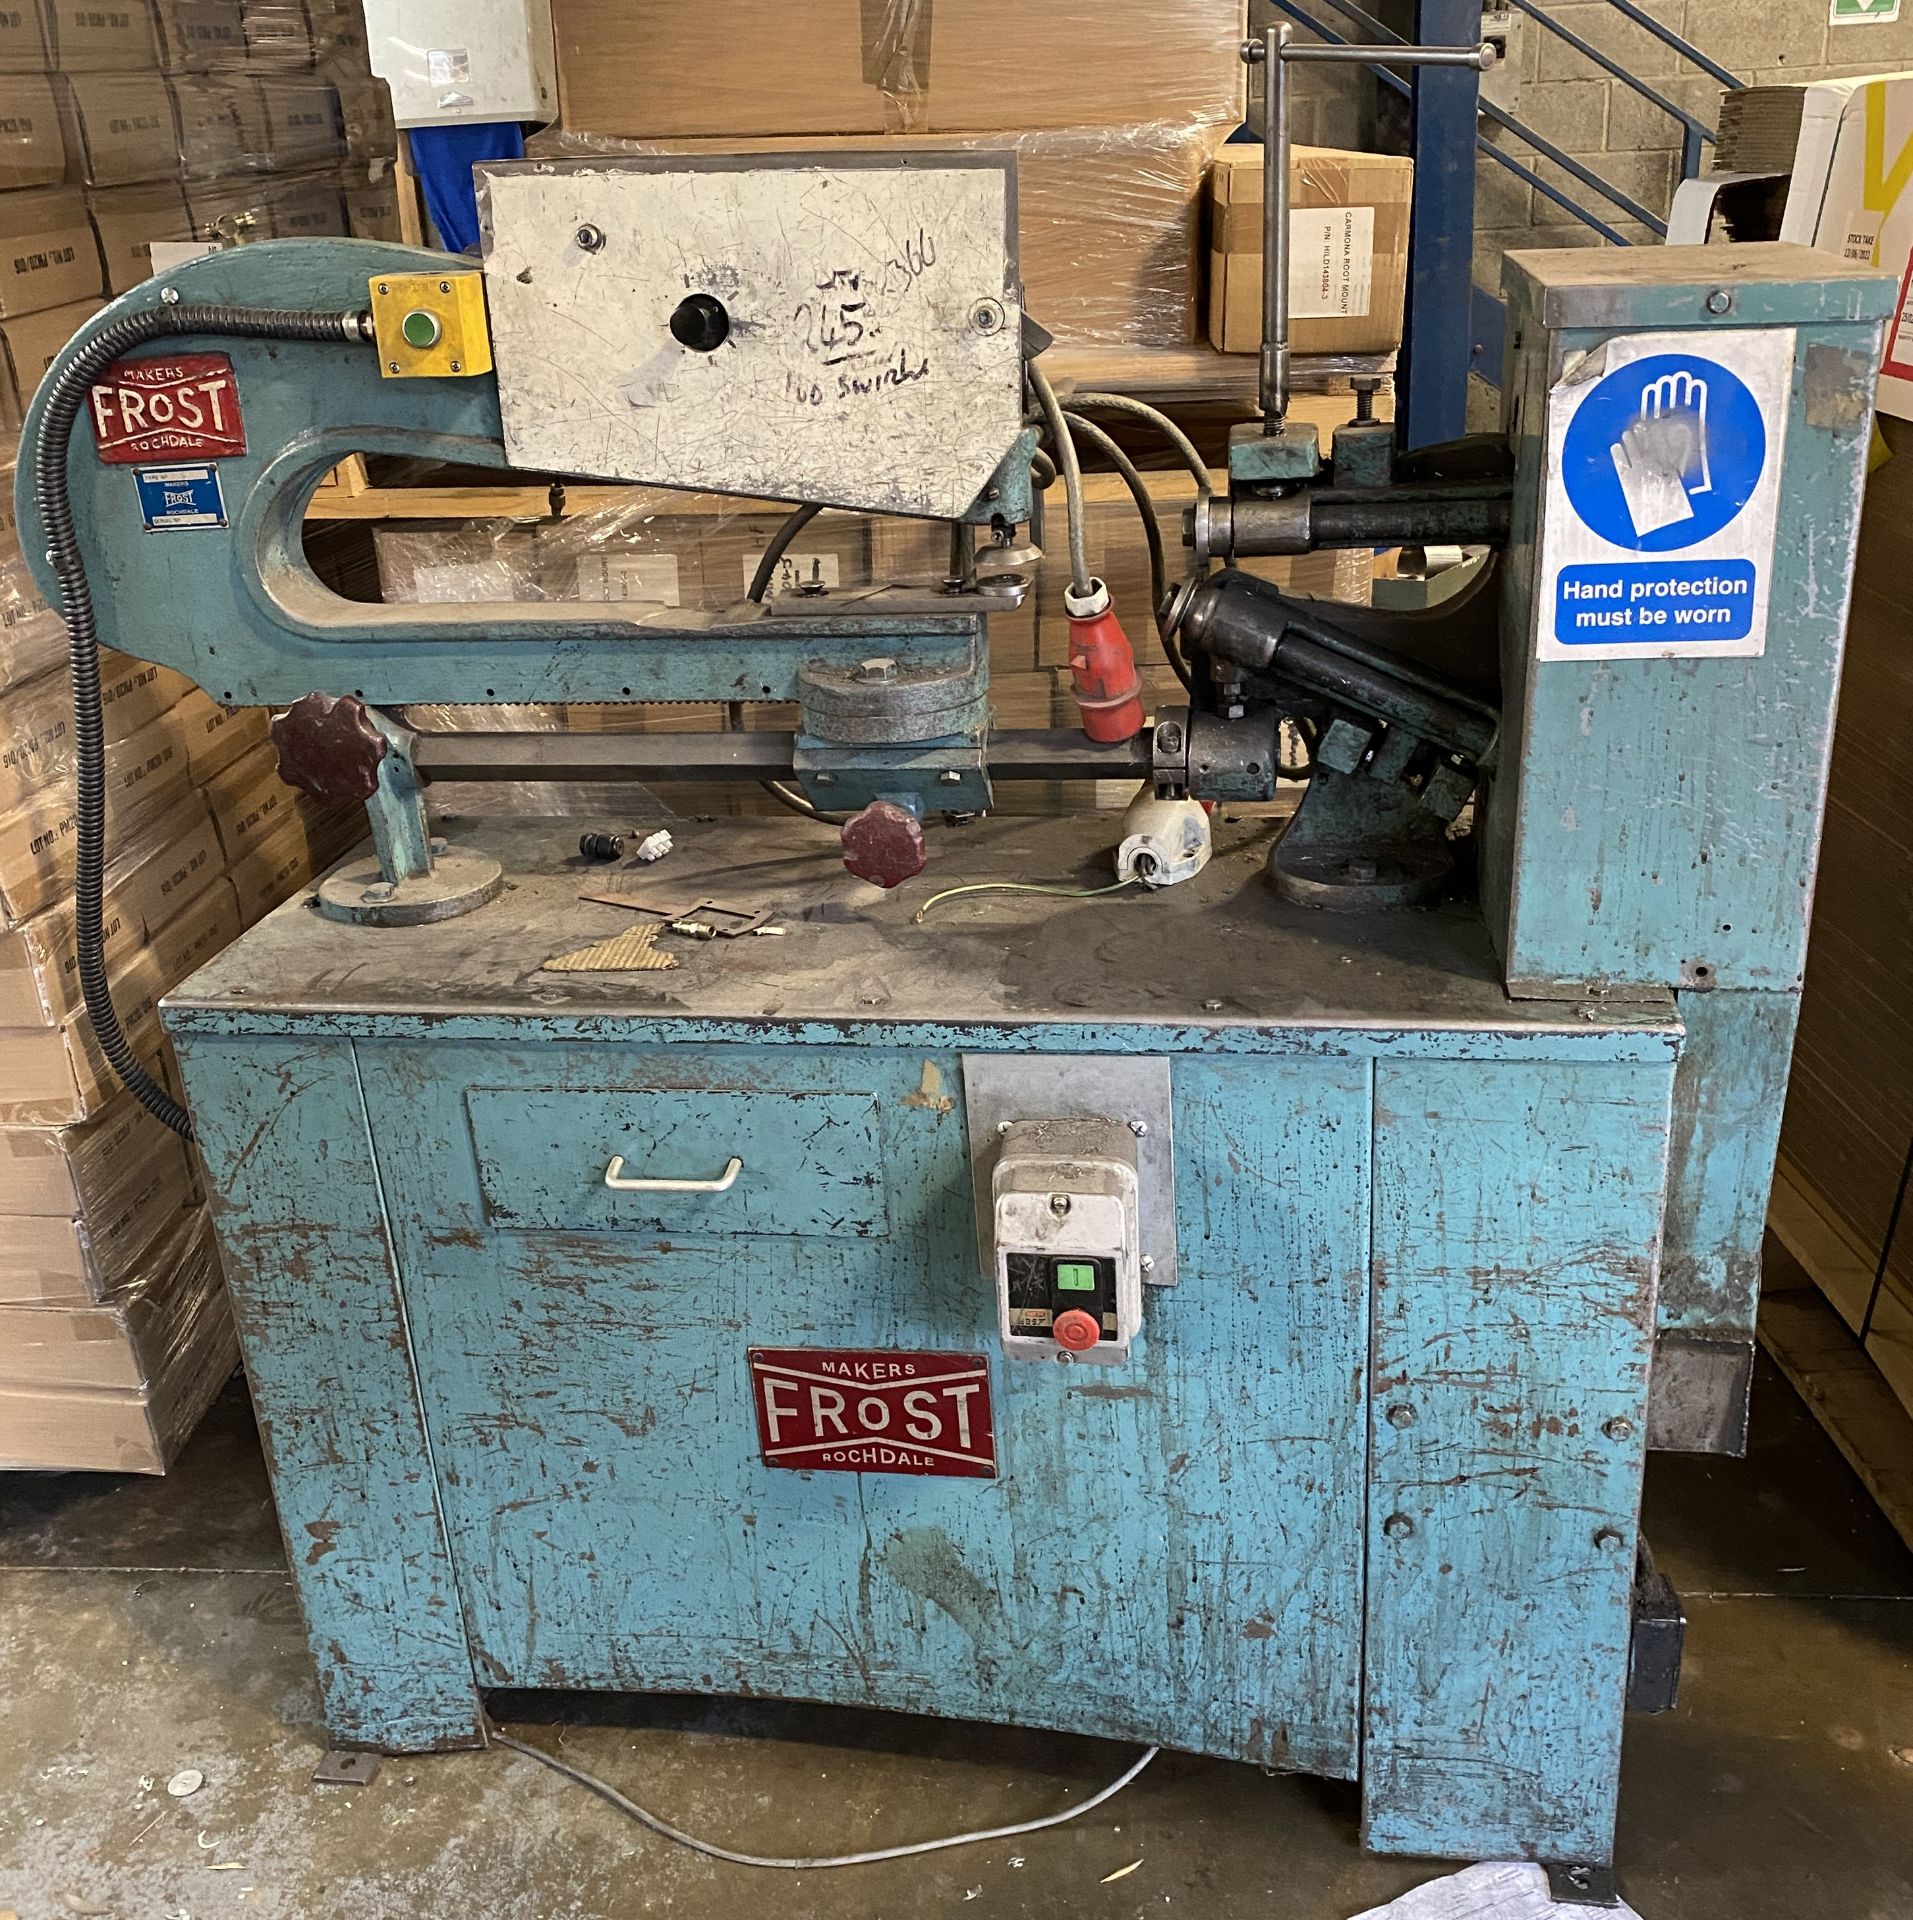 Frost Type 399 Power Circle Cutter sn.3207. 3 phase.